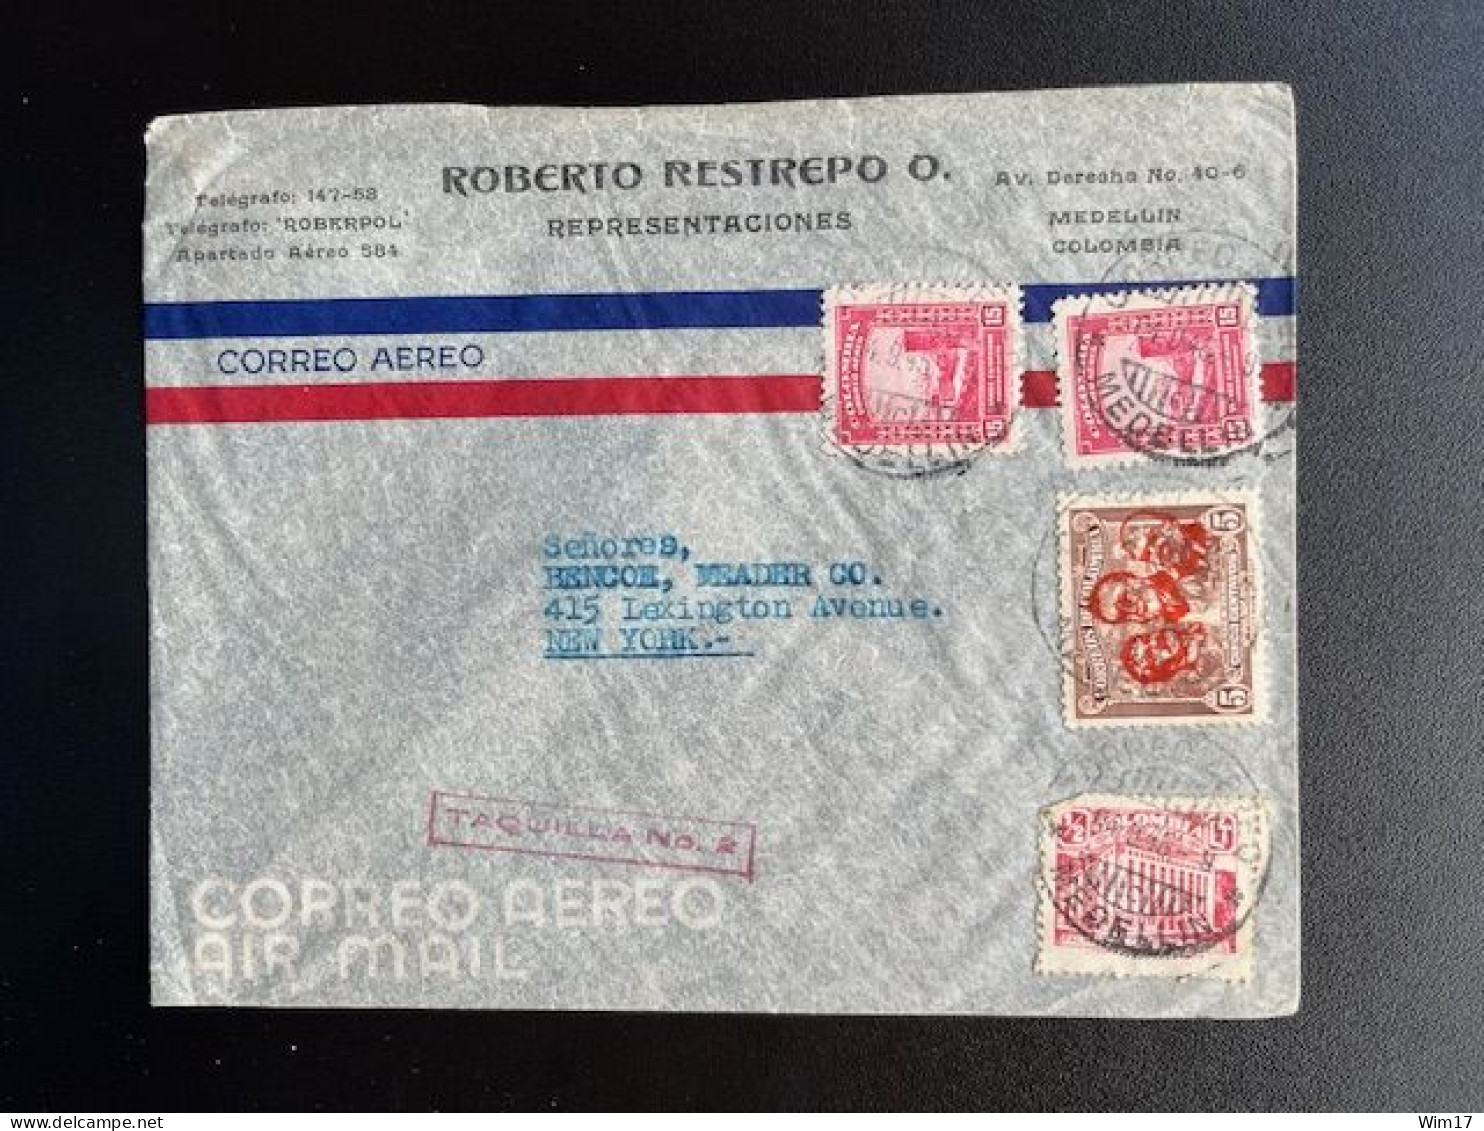 COLOMBIA 1945 AIR MAIL LETTER MEDELLIN TO NEW YORK 04-09-1945 - Colombia